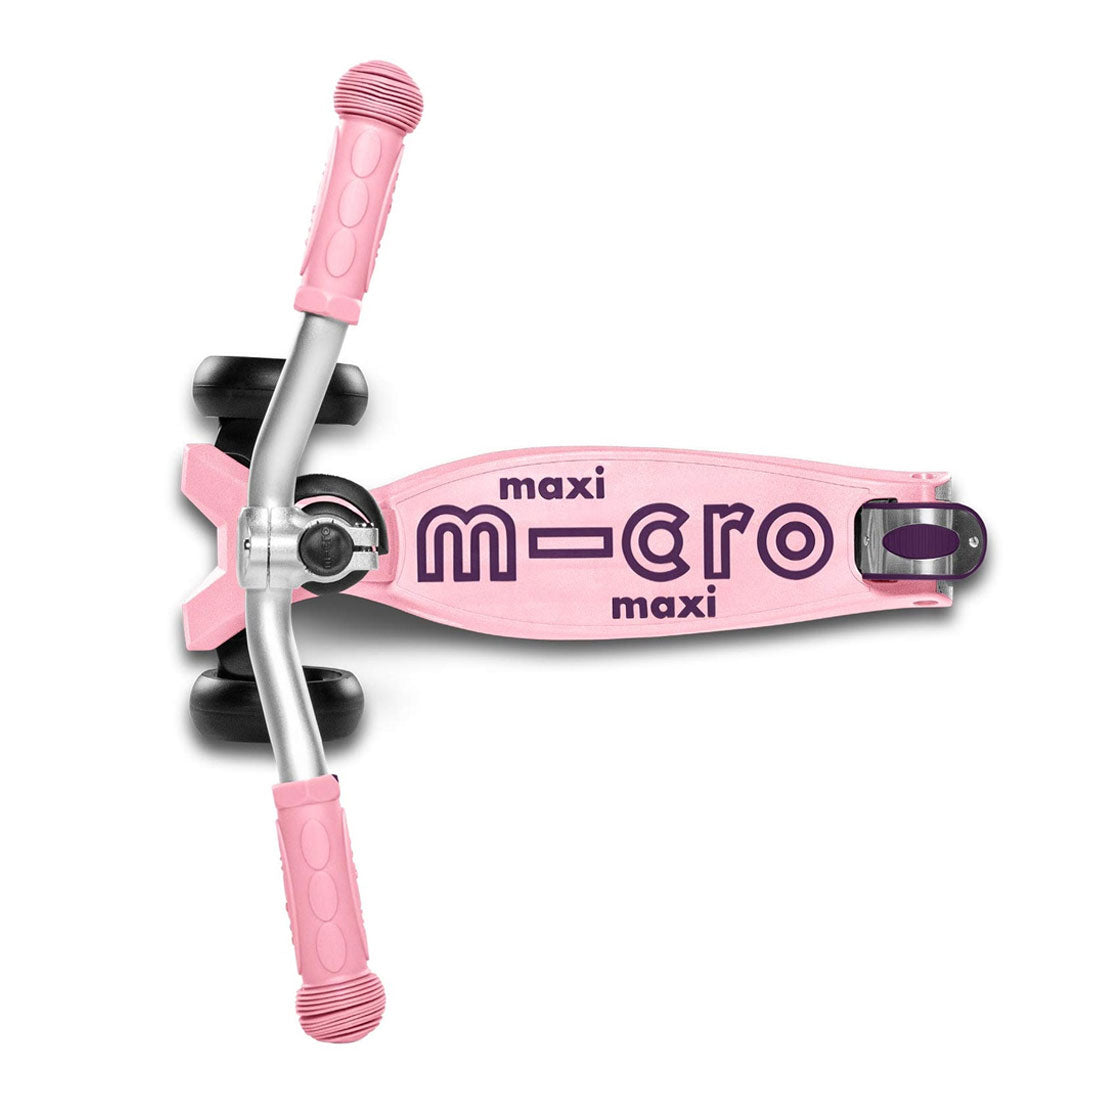 Micro Maxi Deluxe PRO Scooter - Rose Pink Scooter Completes Rec